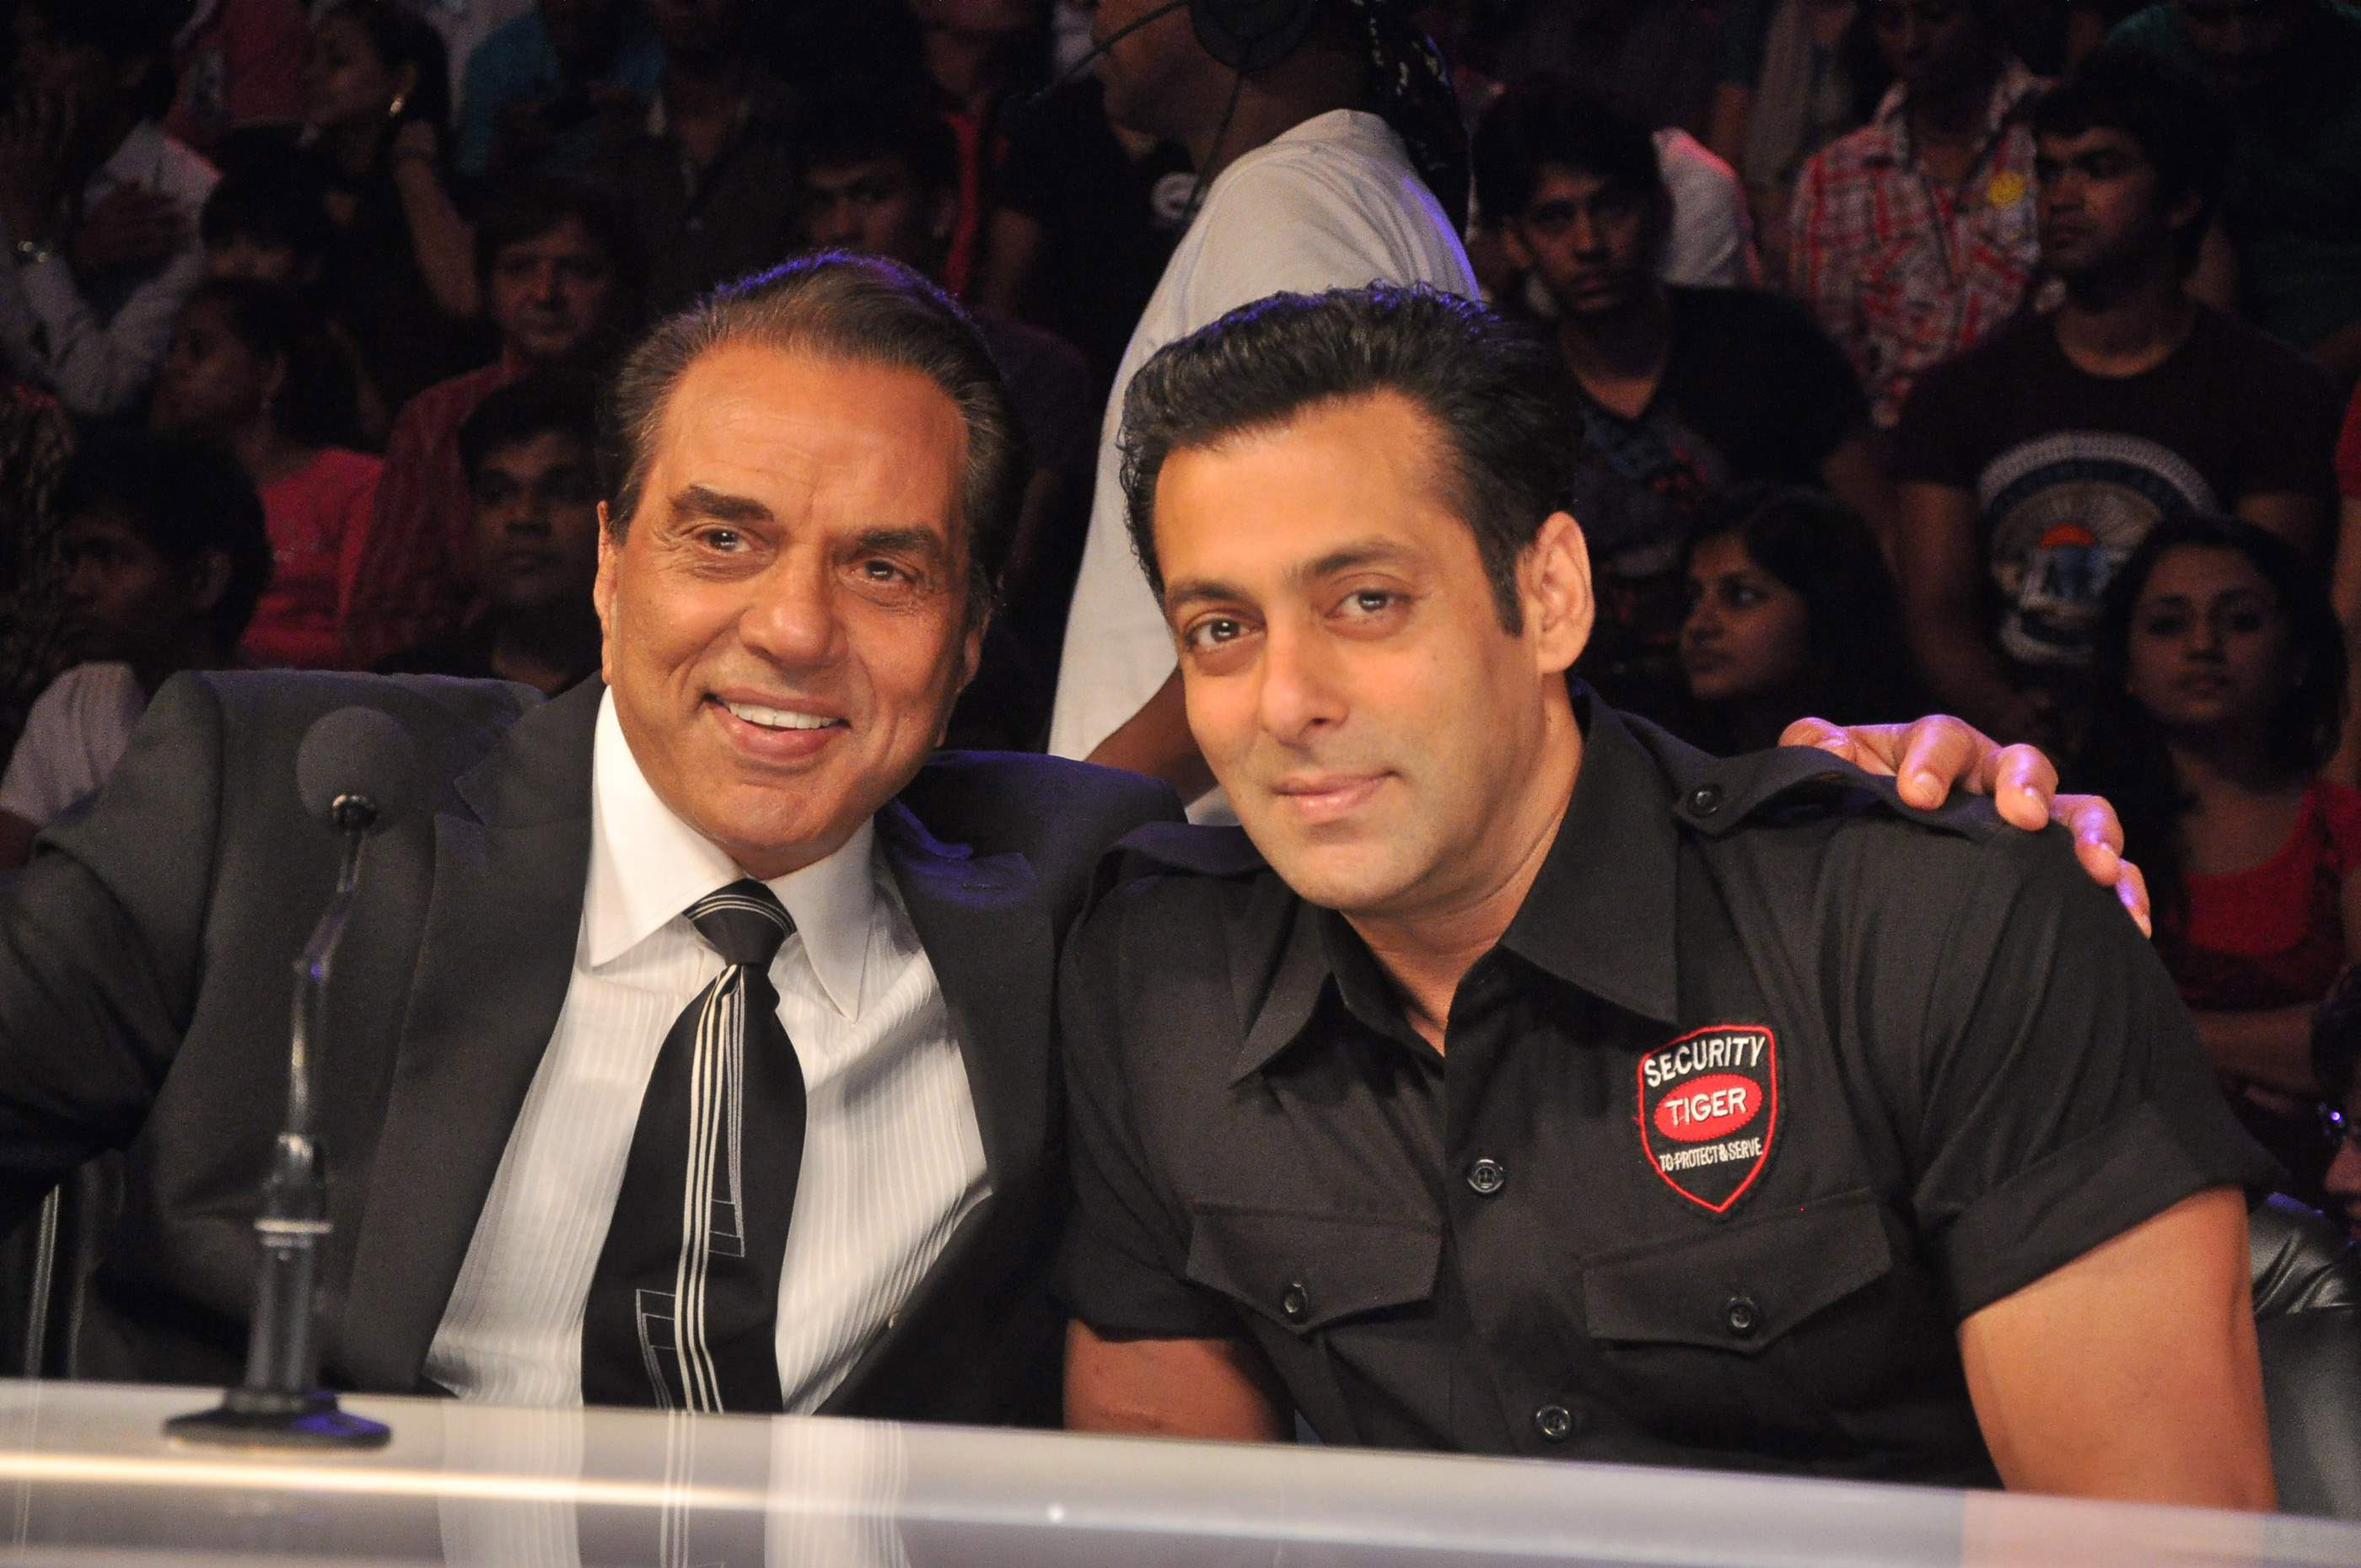 Dharmendra and Salman Khan promotes the movie 'Bodyguard' pictures | Picture 63773